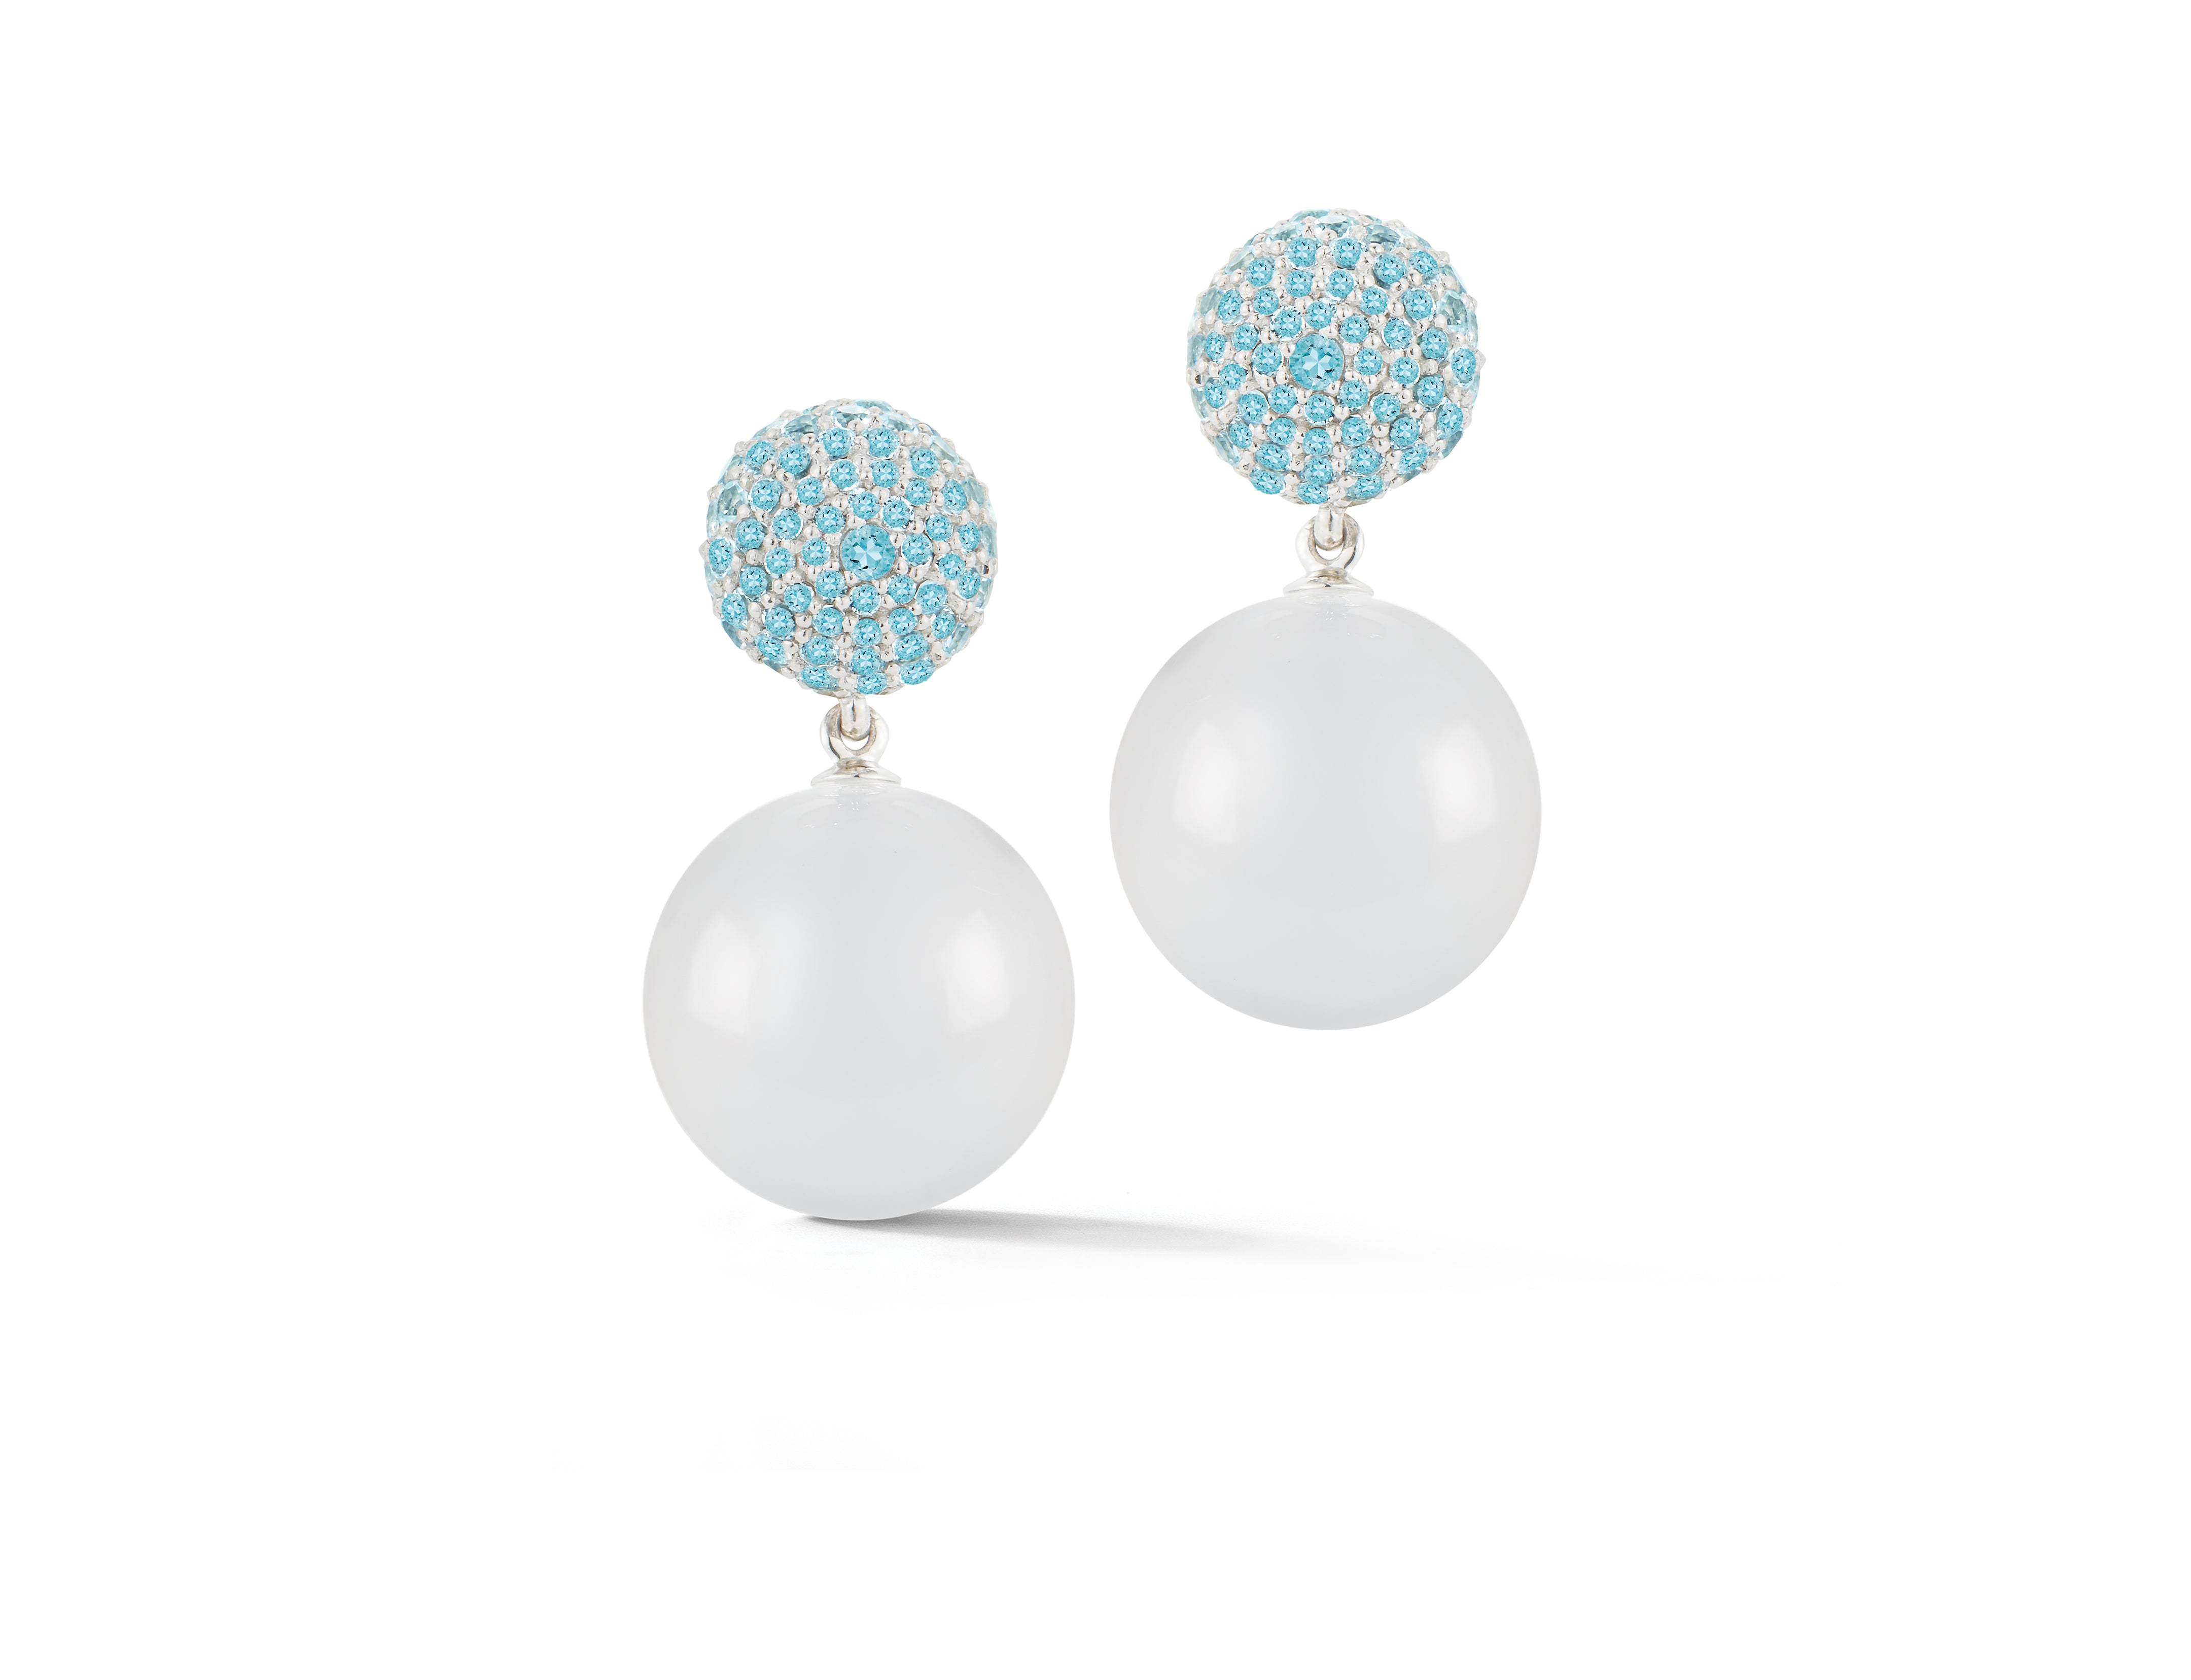 Boule Earrings with Faceted Pave Blue Topaz Tops and Milky White Quartz Bead Drop Set in 18 Karat White Gold. Signed Seaman Schepps.